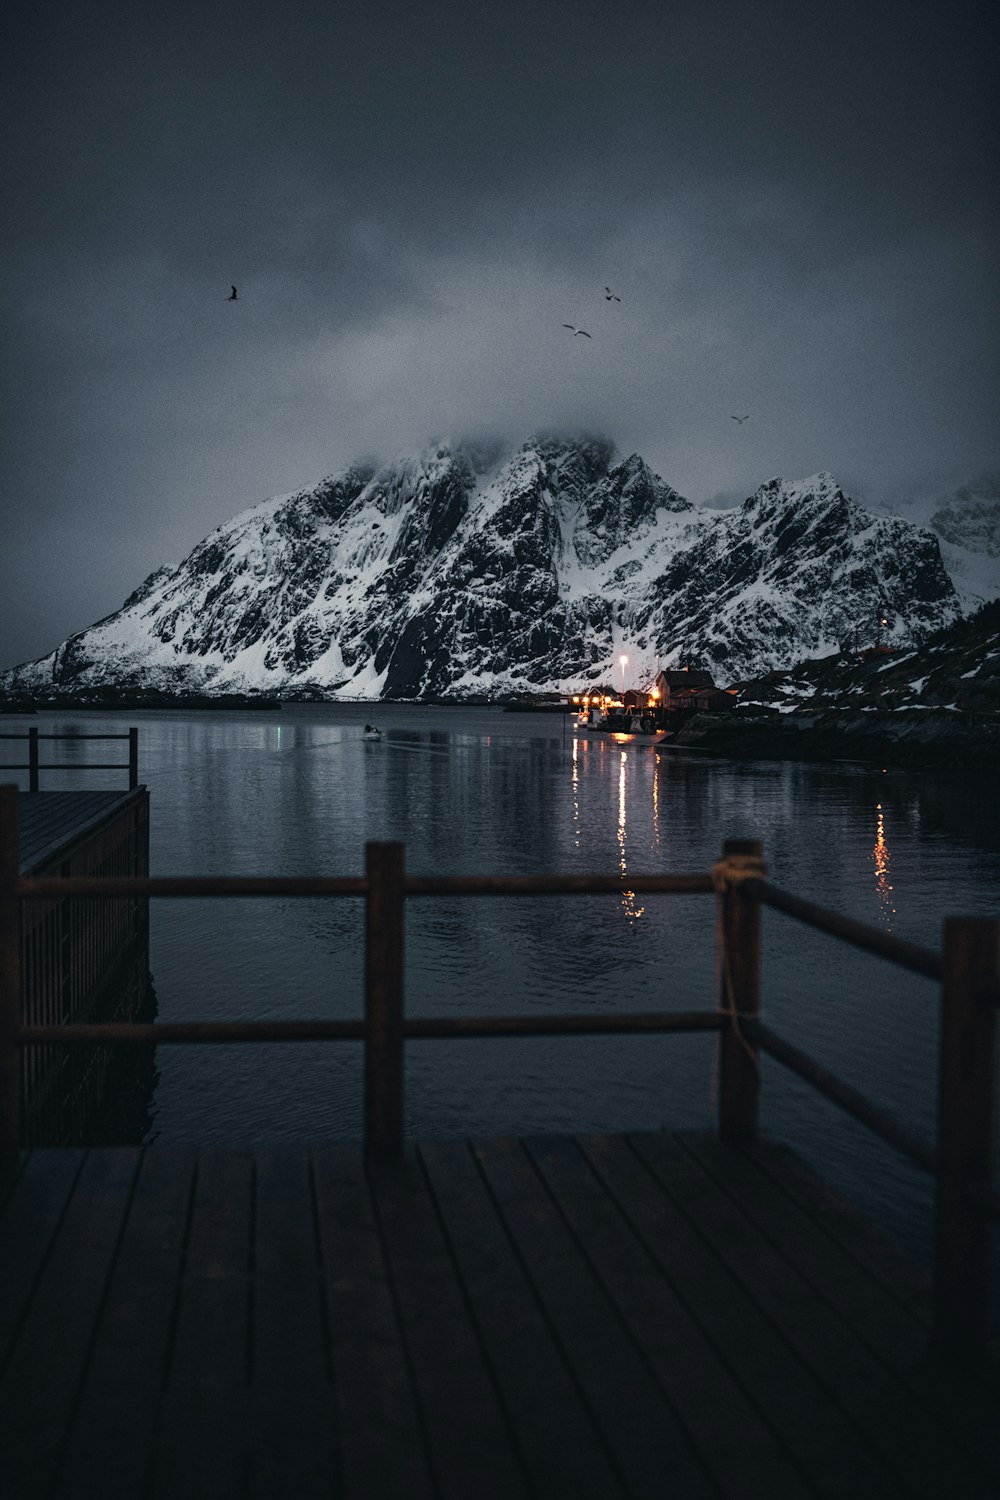 brown wooden dock on lake near snow covered mountain